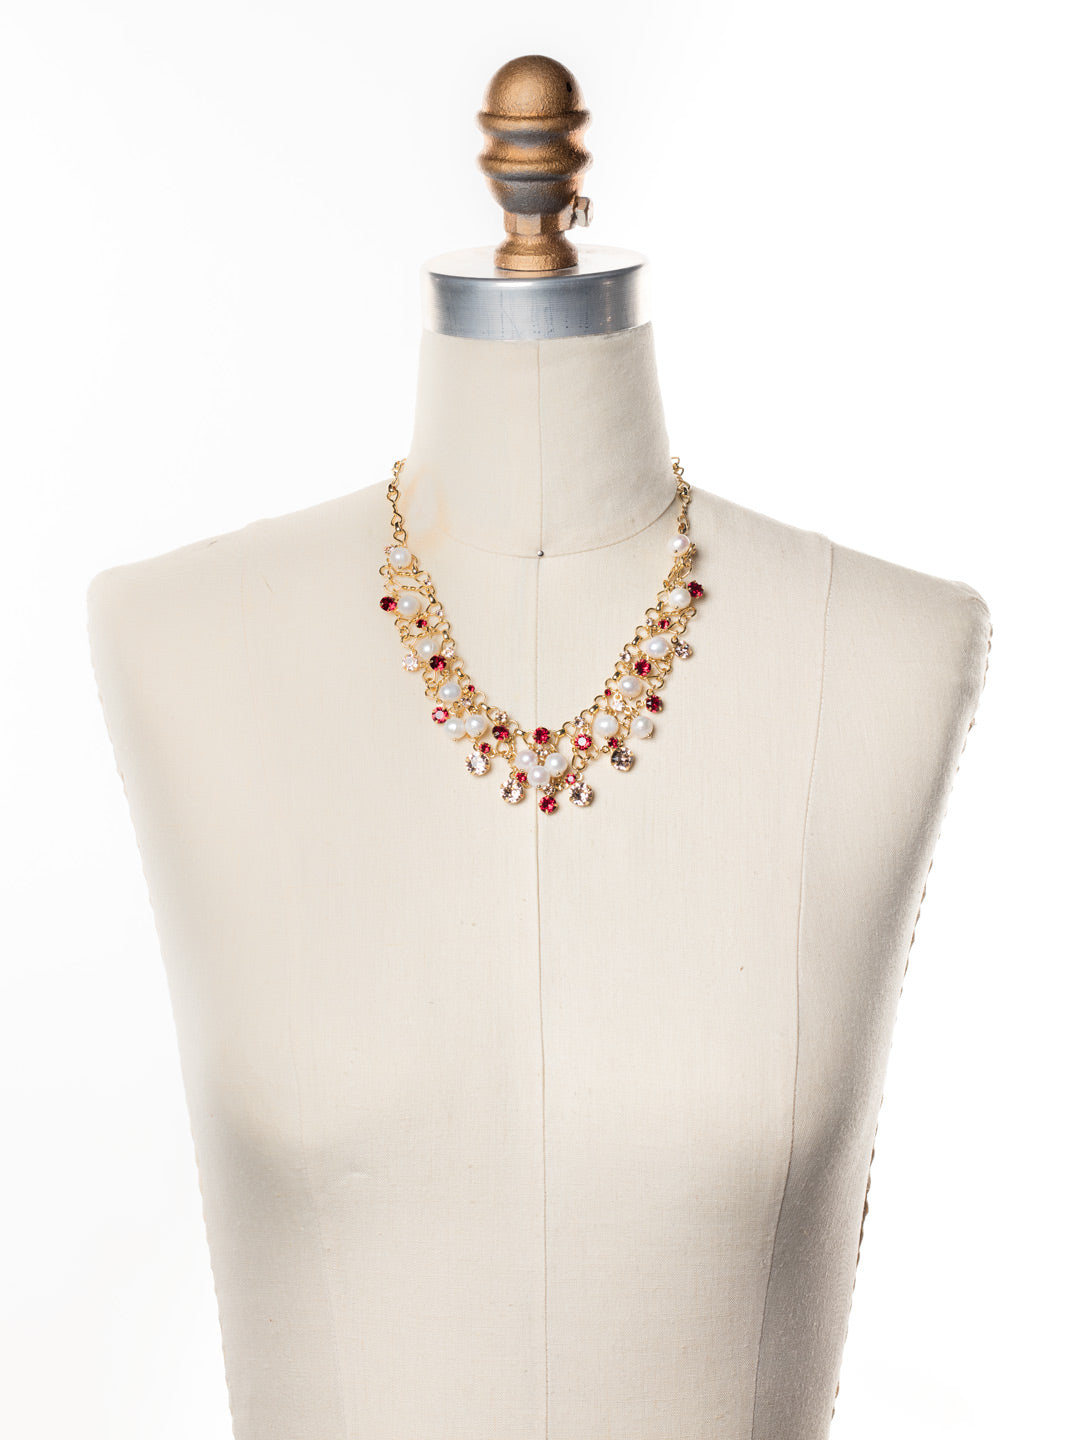 Clustered Tennis Necklace - White Gold – Huerta Jewelry